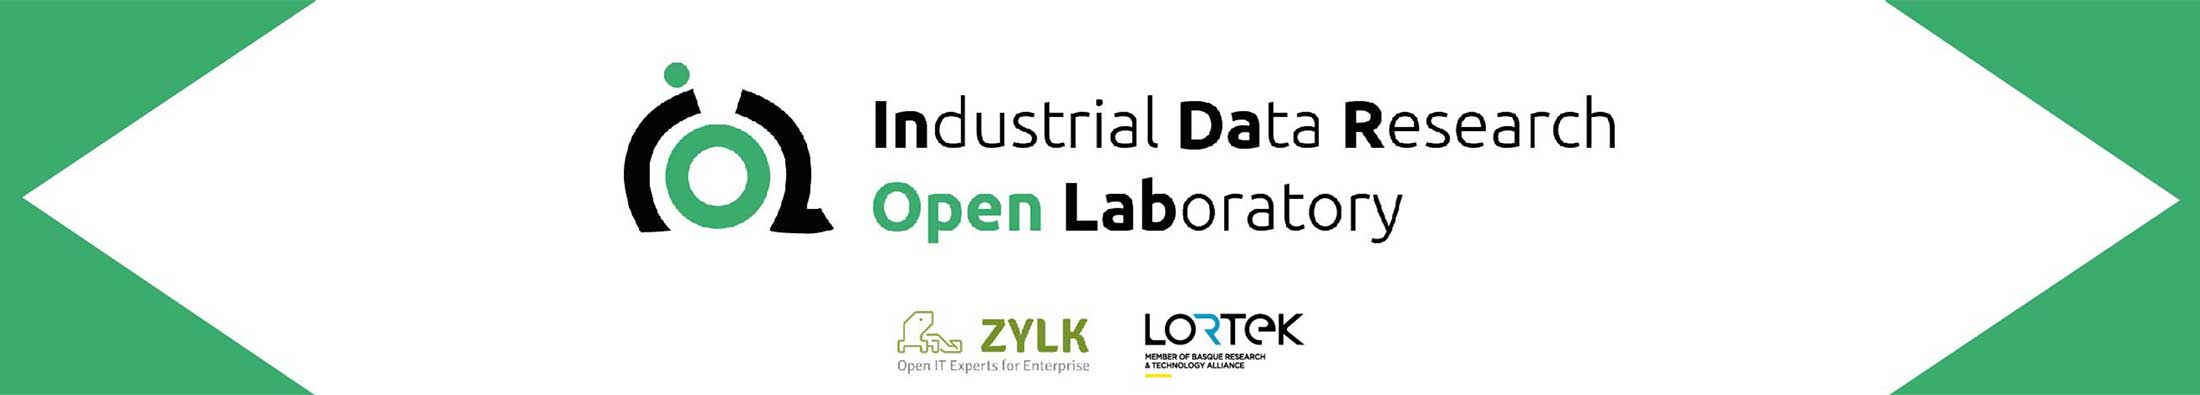 Industrial Data Research Open Laboratory